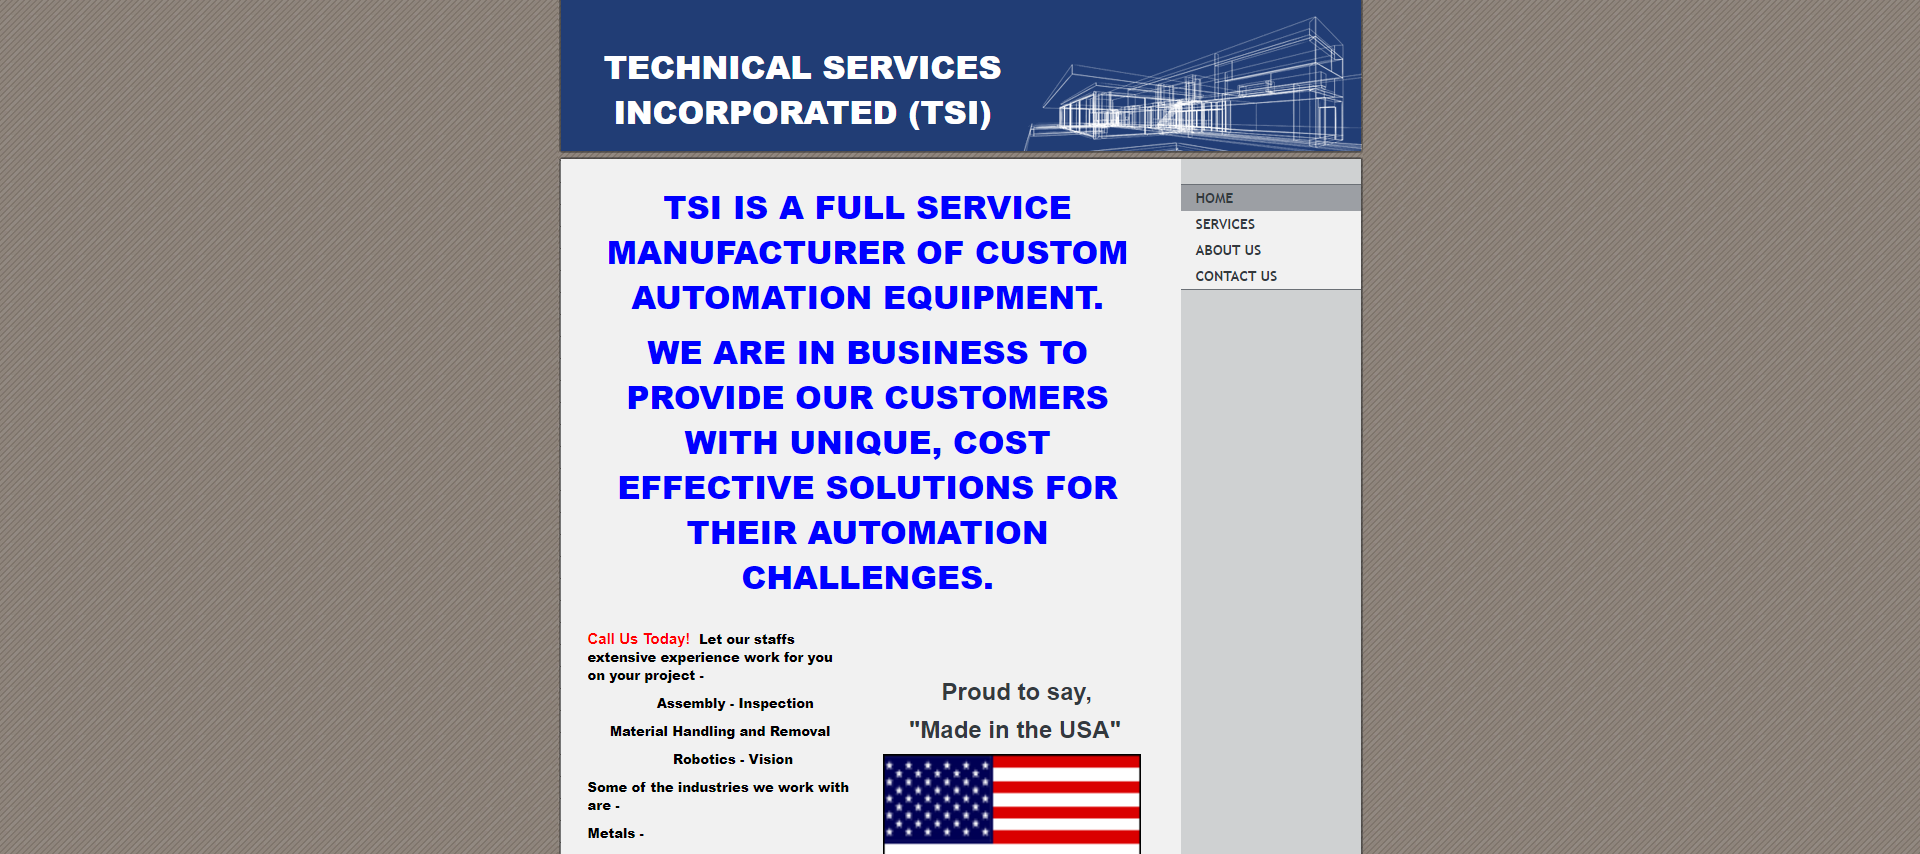 Screenshot of previous website design for Technical Services Incorporated